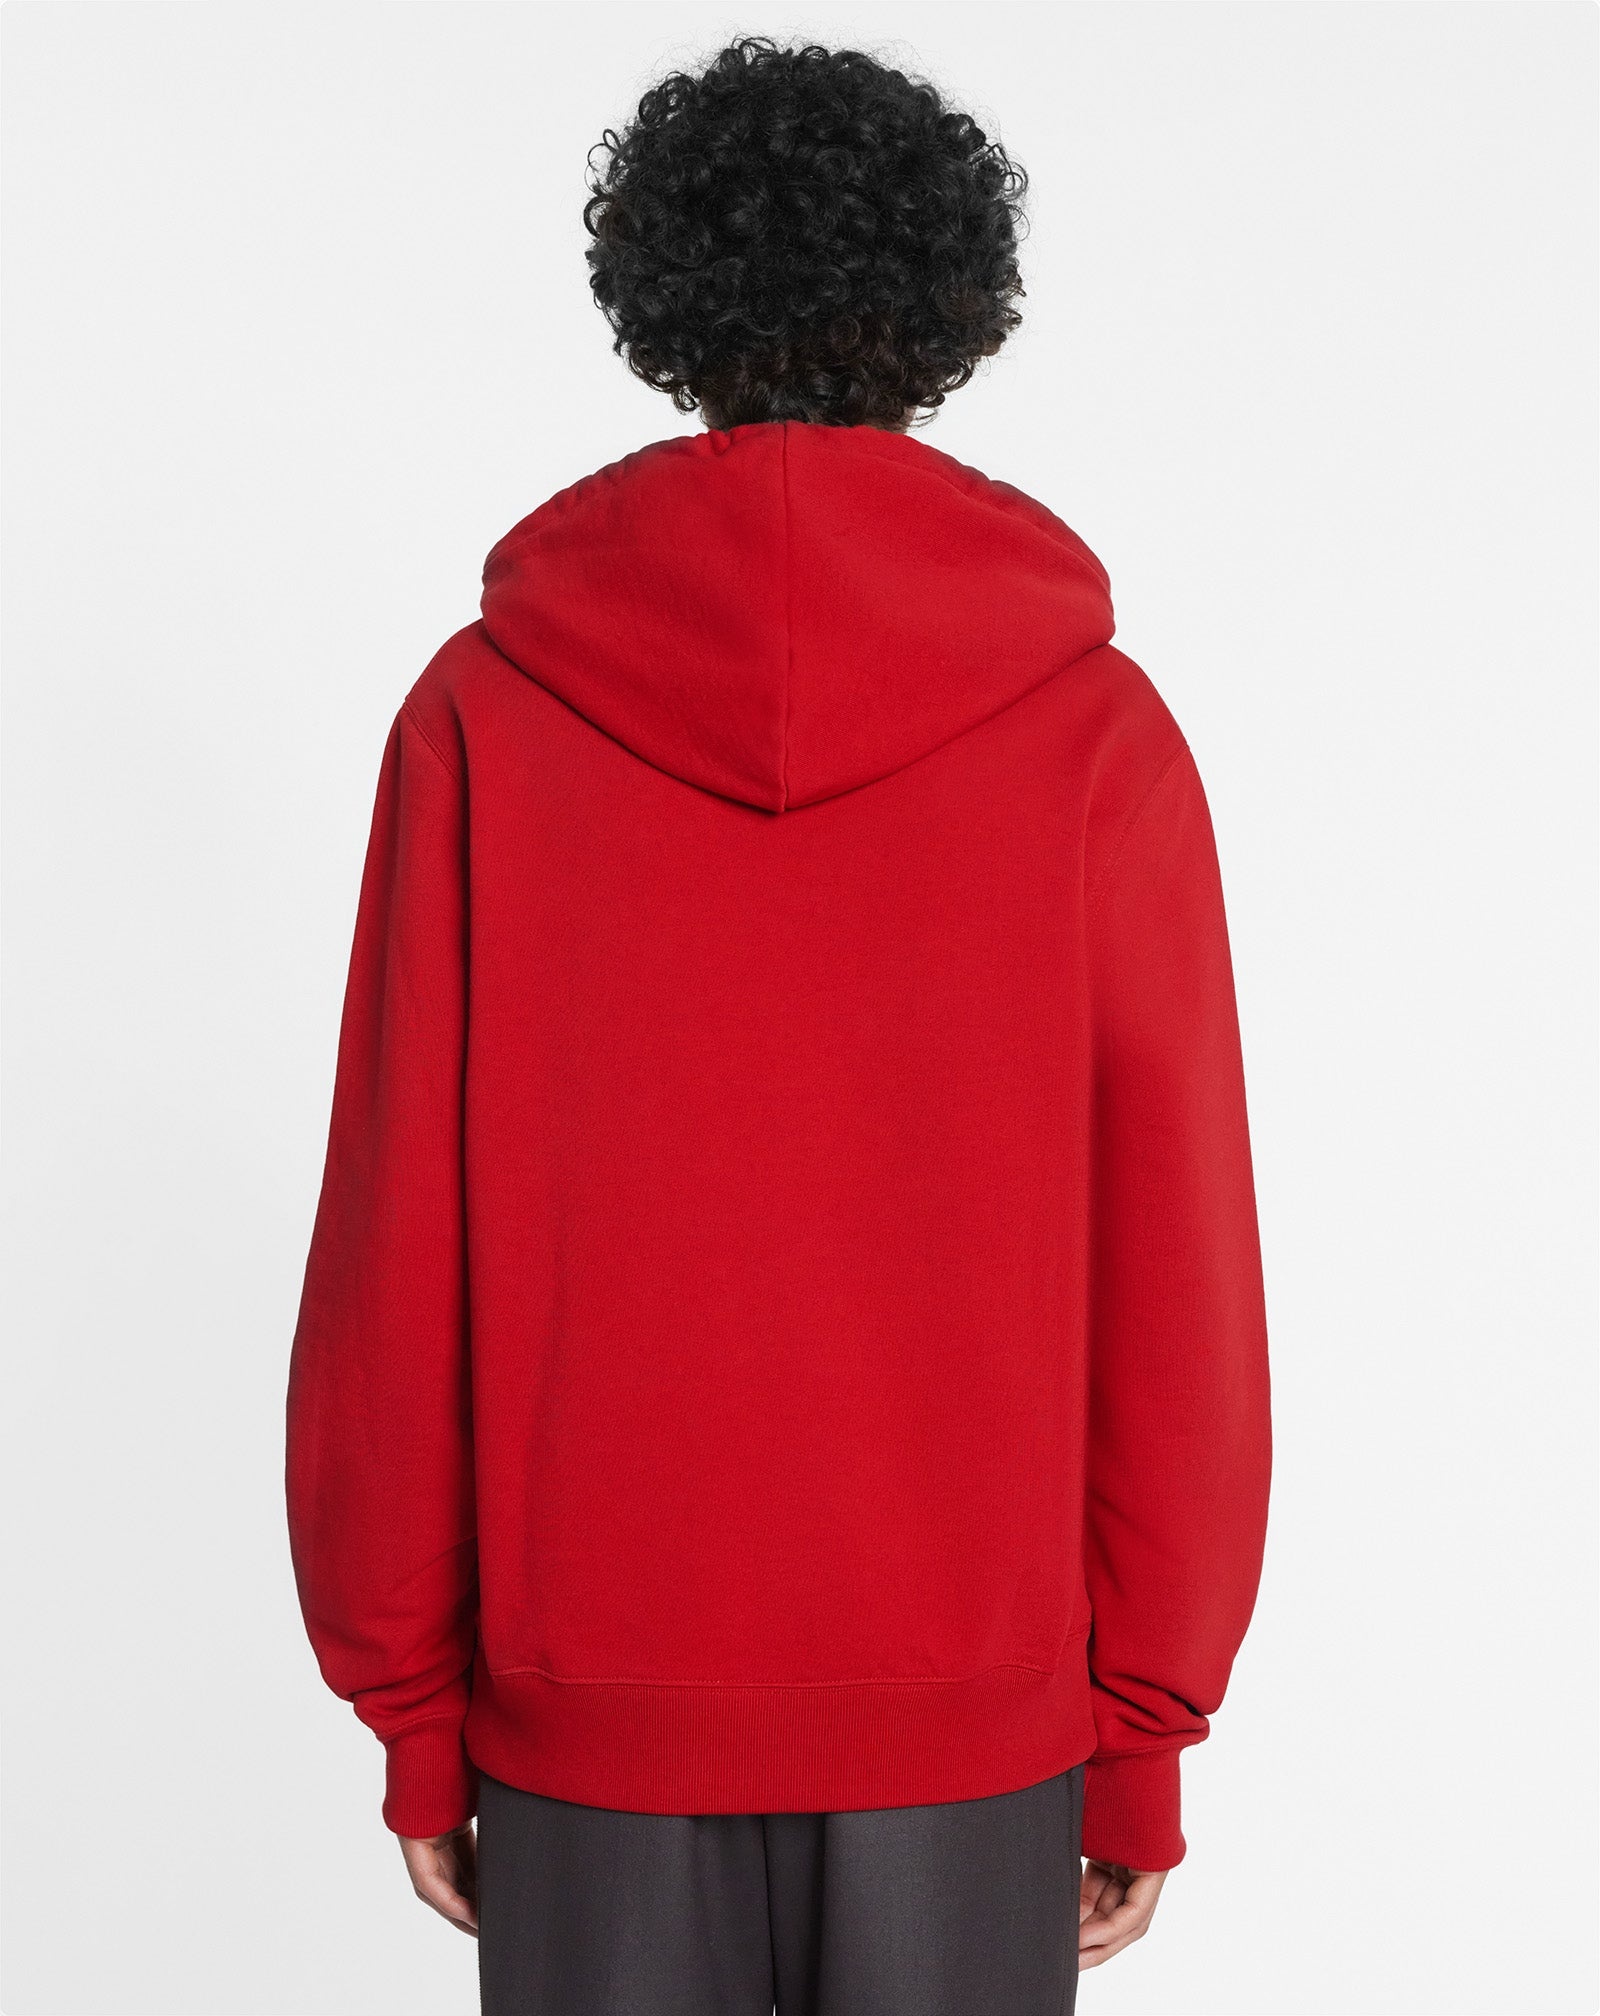 CURB EMBROIDERED HOODED SWEATER - 5